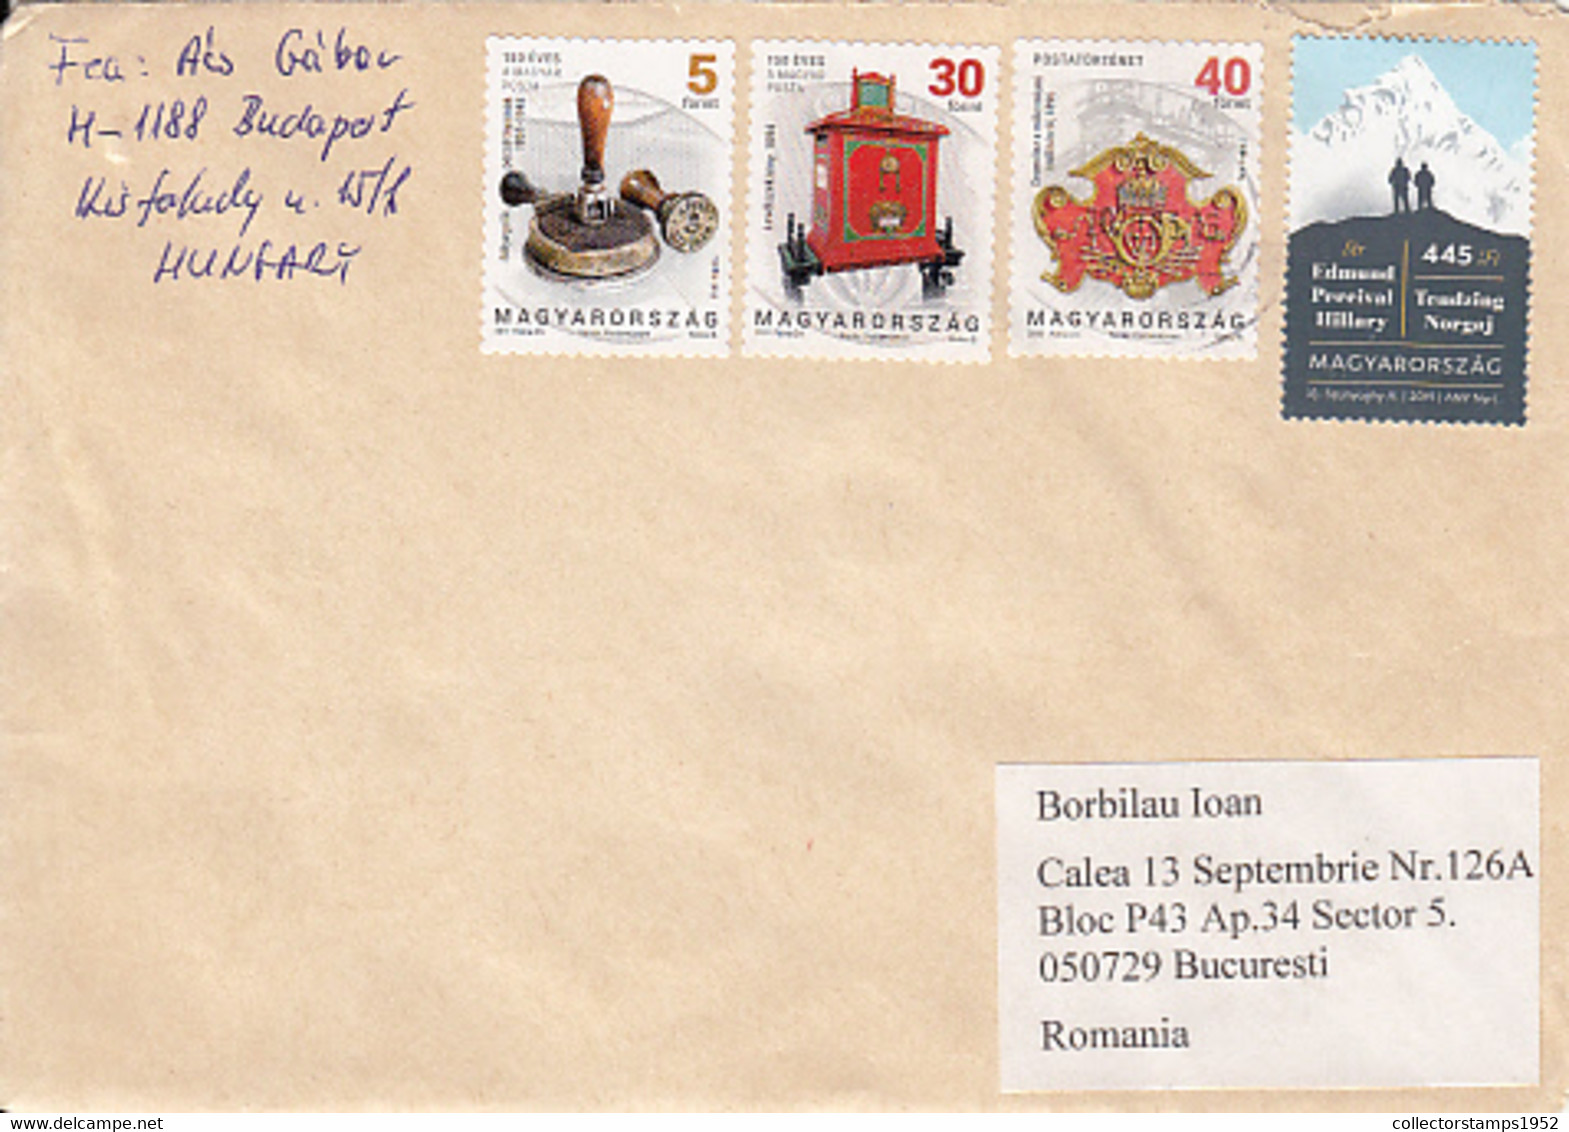 91934- INK STAMP, MAILBOXES, MOUNTAIN, FINE STAMPS ON COVER, 2020, HUNGARY - Briefe U. Dokumente